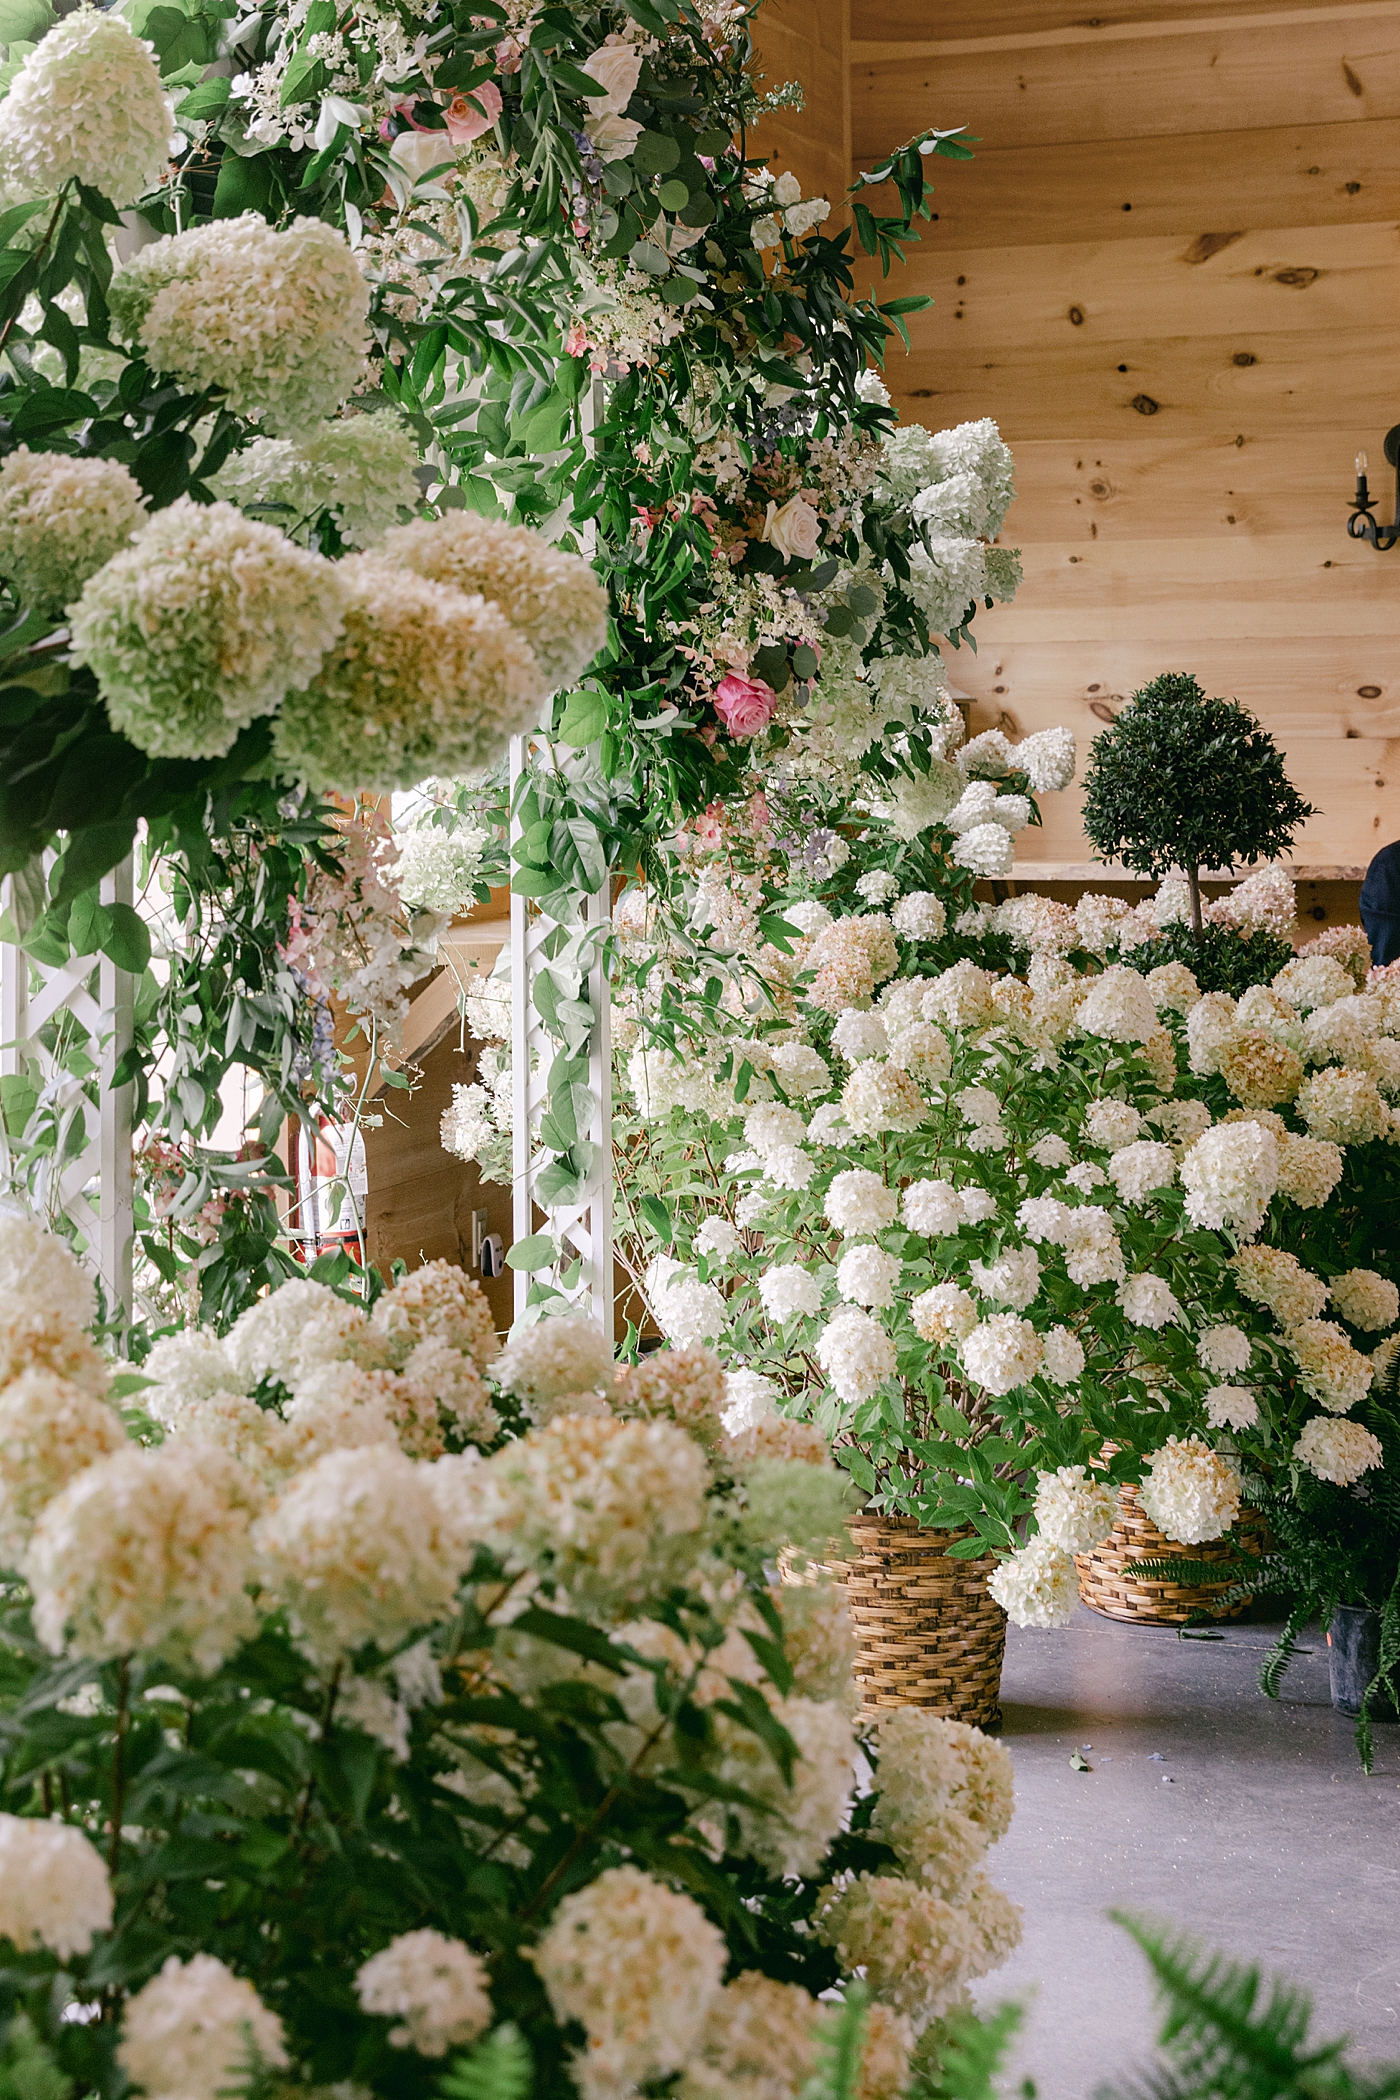 Wedding ceremony location with florals and greenery | Image by Hudson Valley Wedding Photographer Hope Helmuth